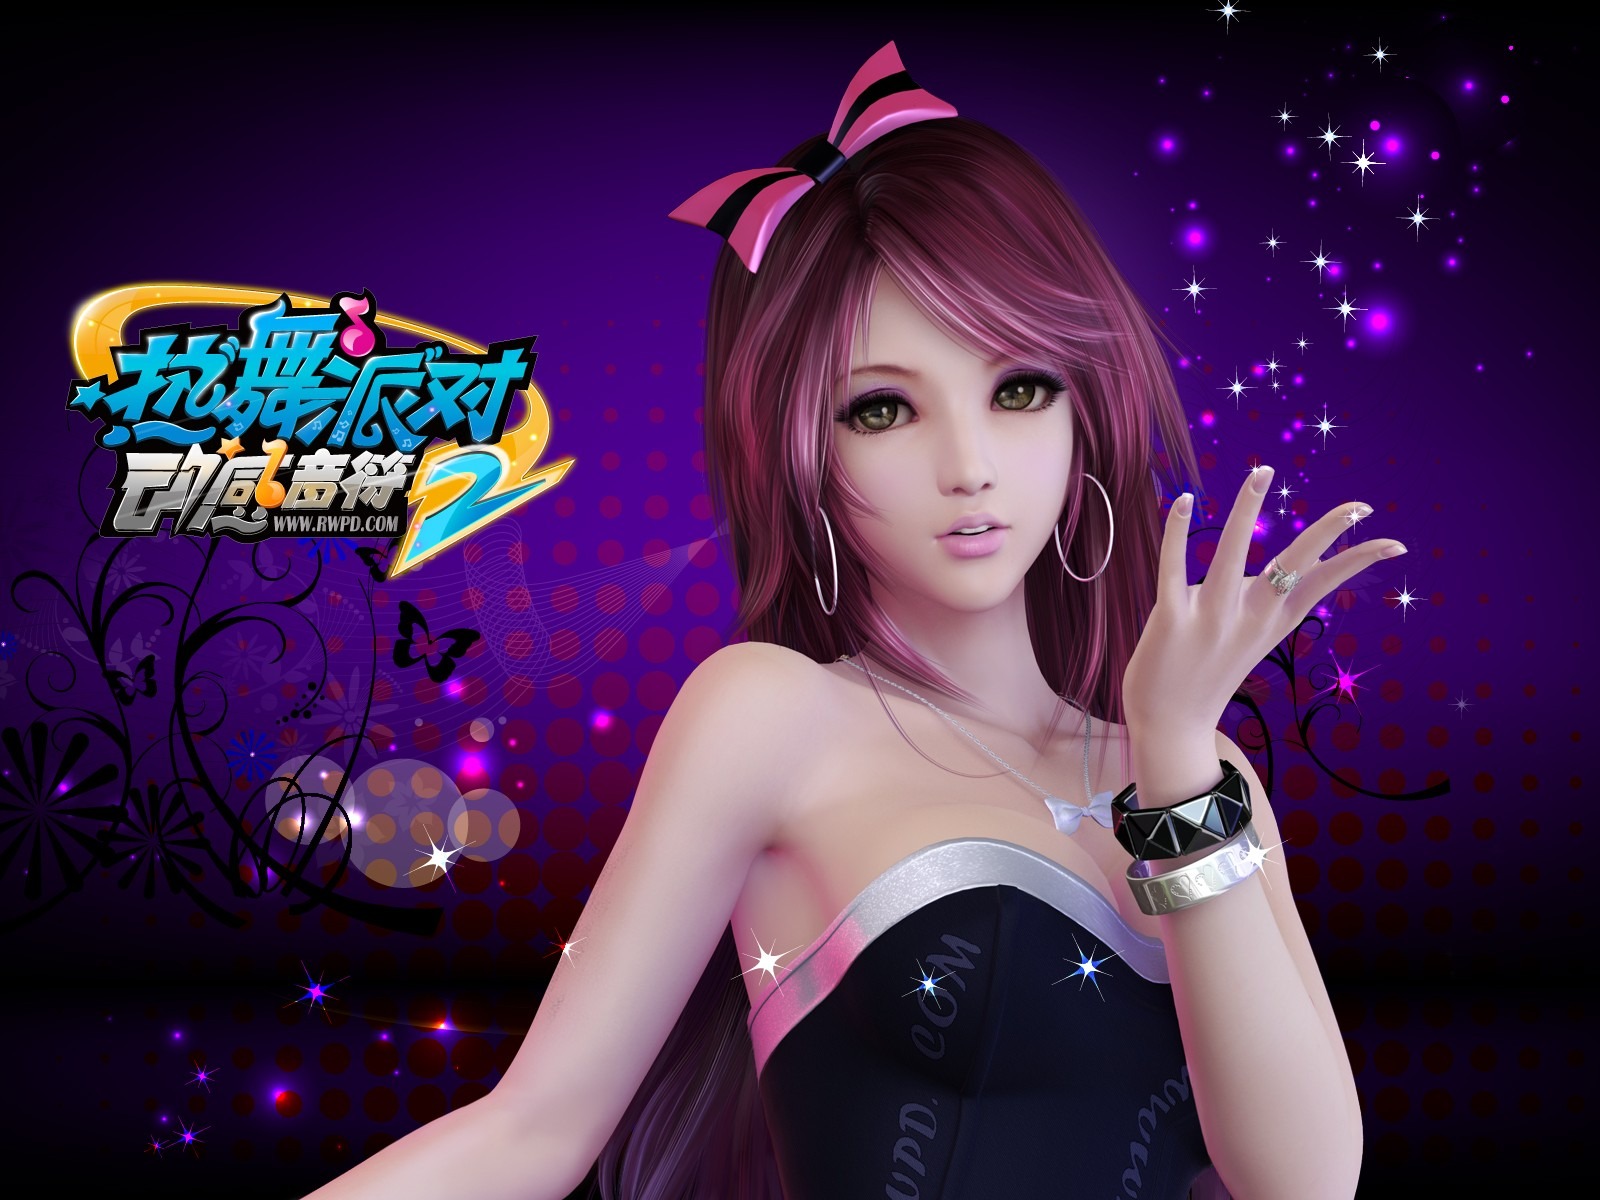 Online game Hot Dance Party II official wallpapers #33 - 1600x1200